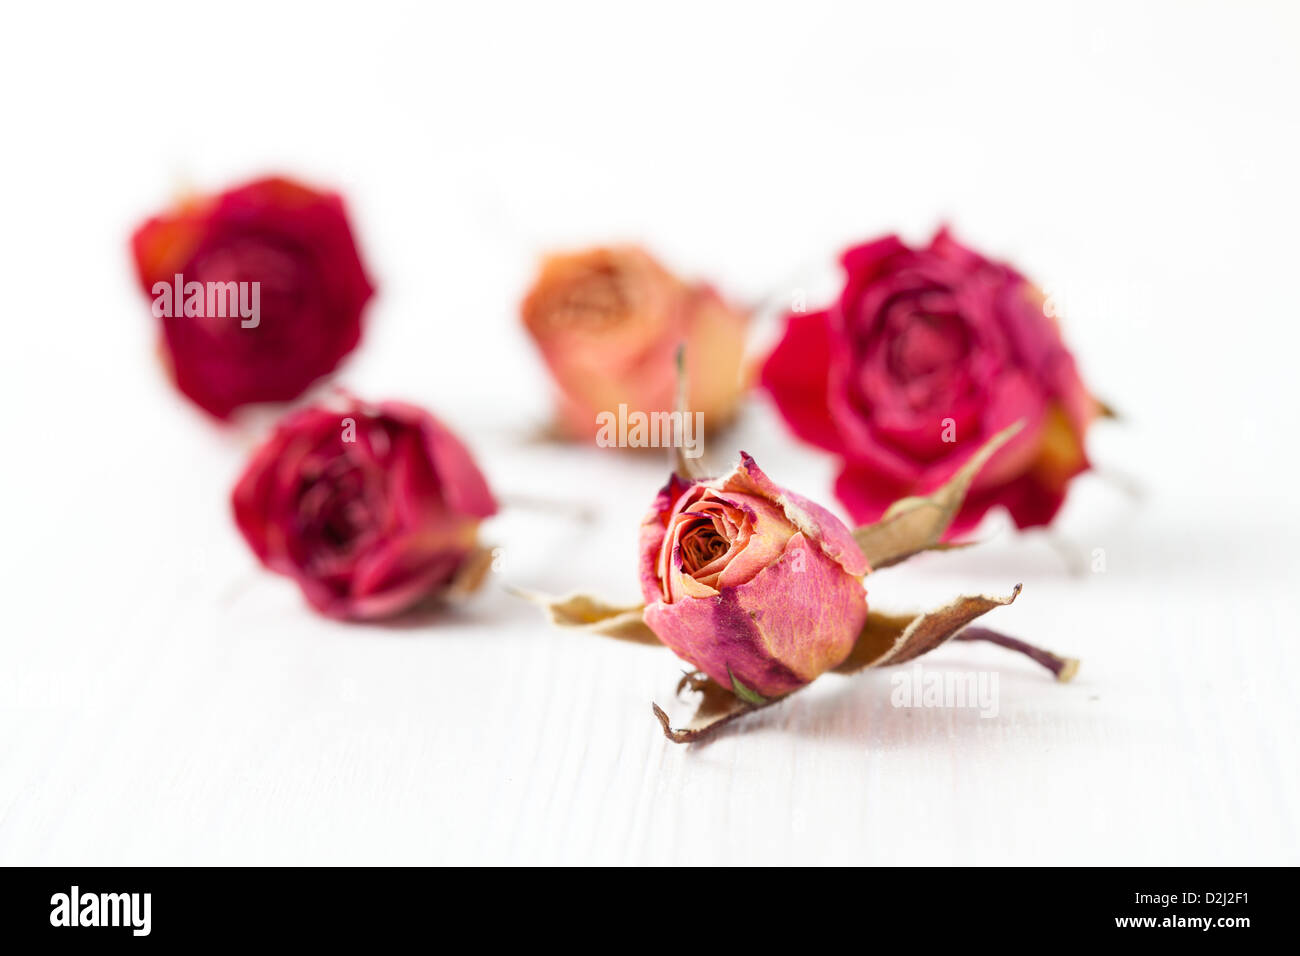 Can a dried rose stem regrow again with proper sunlight and